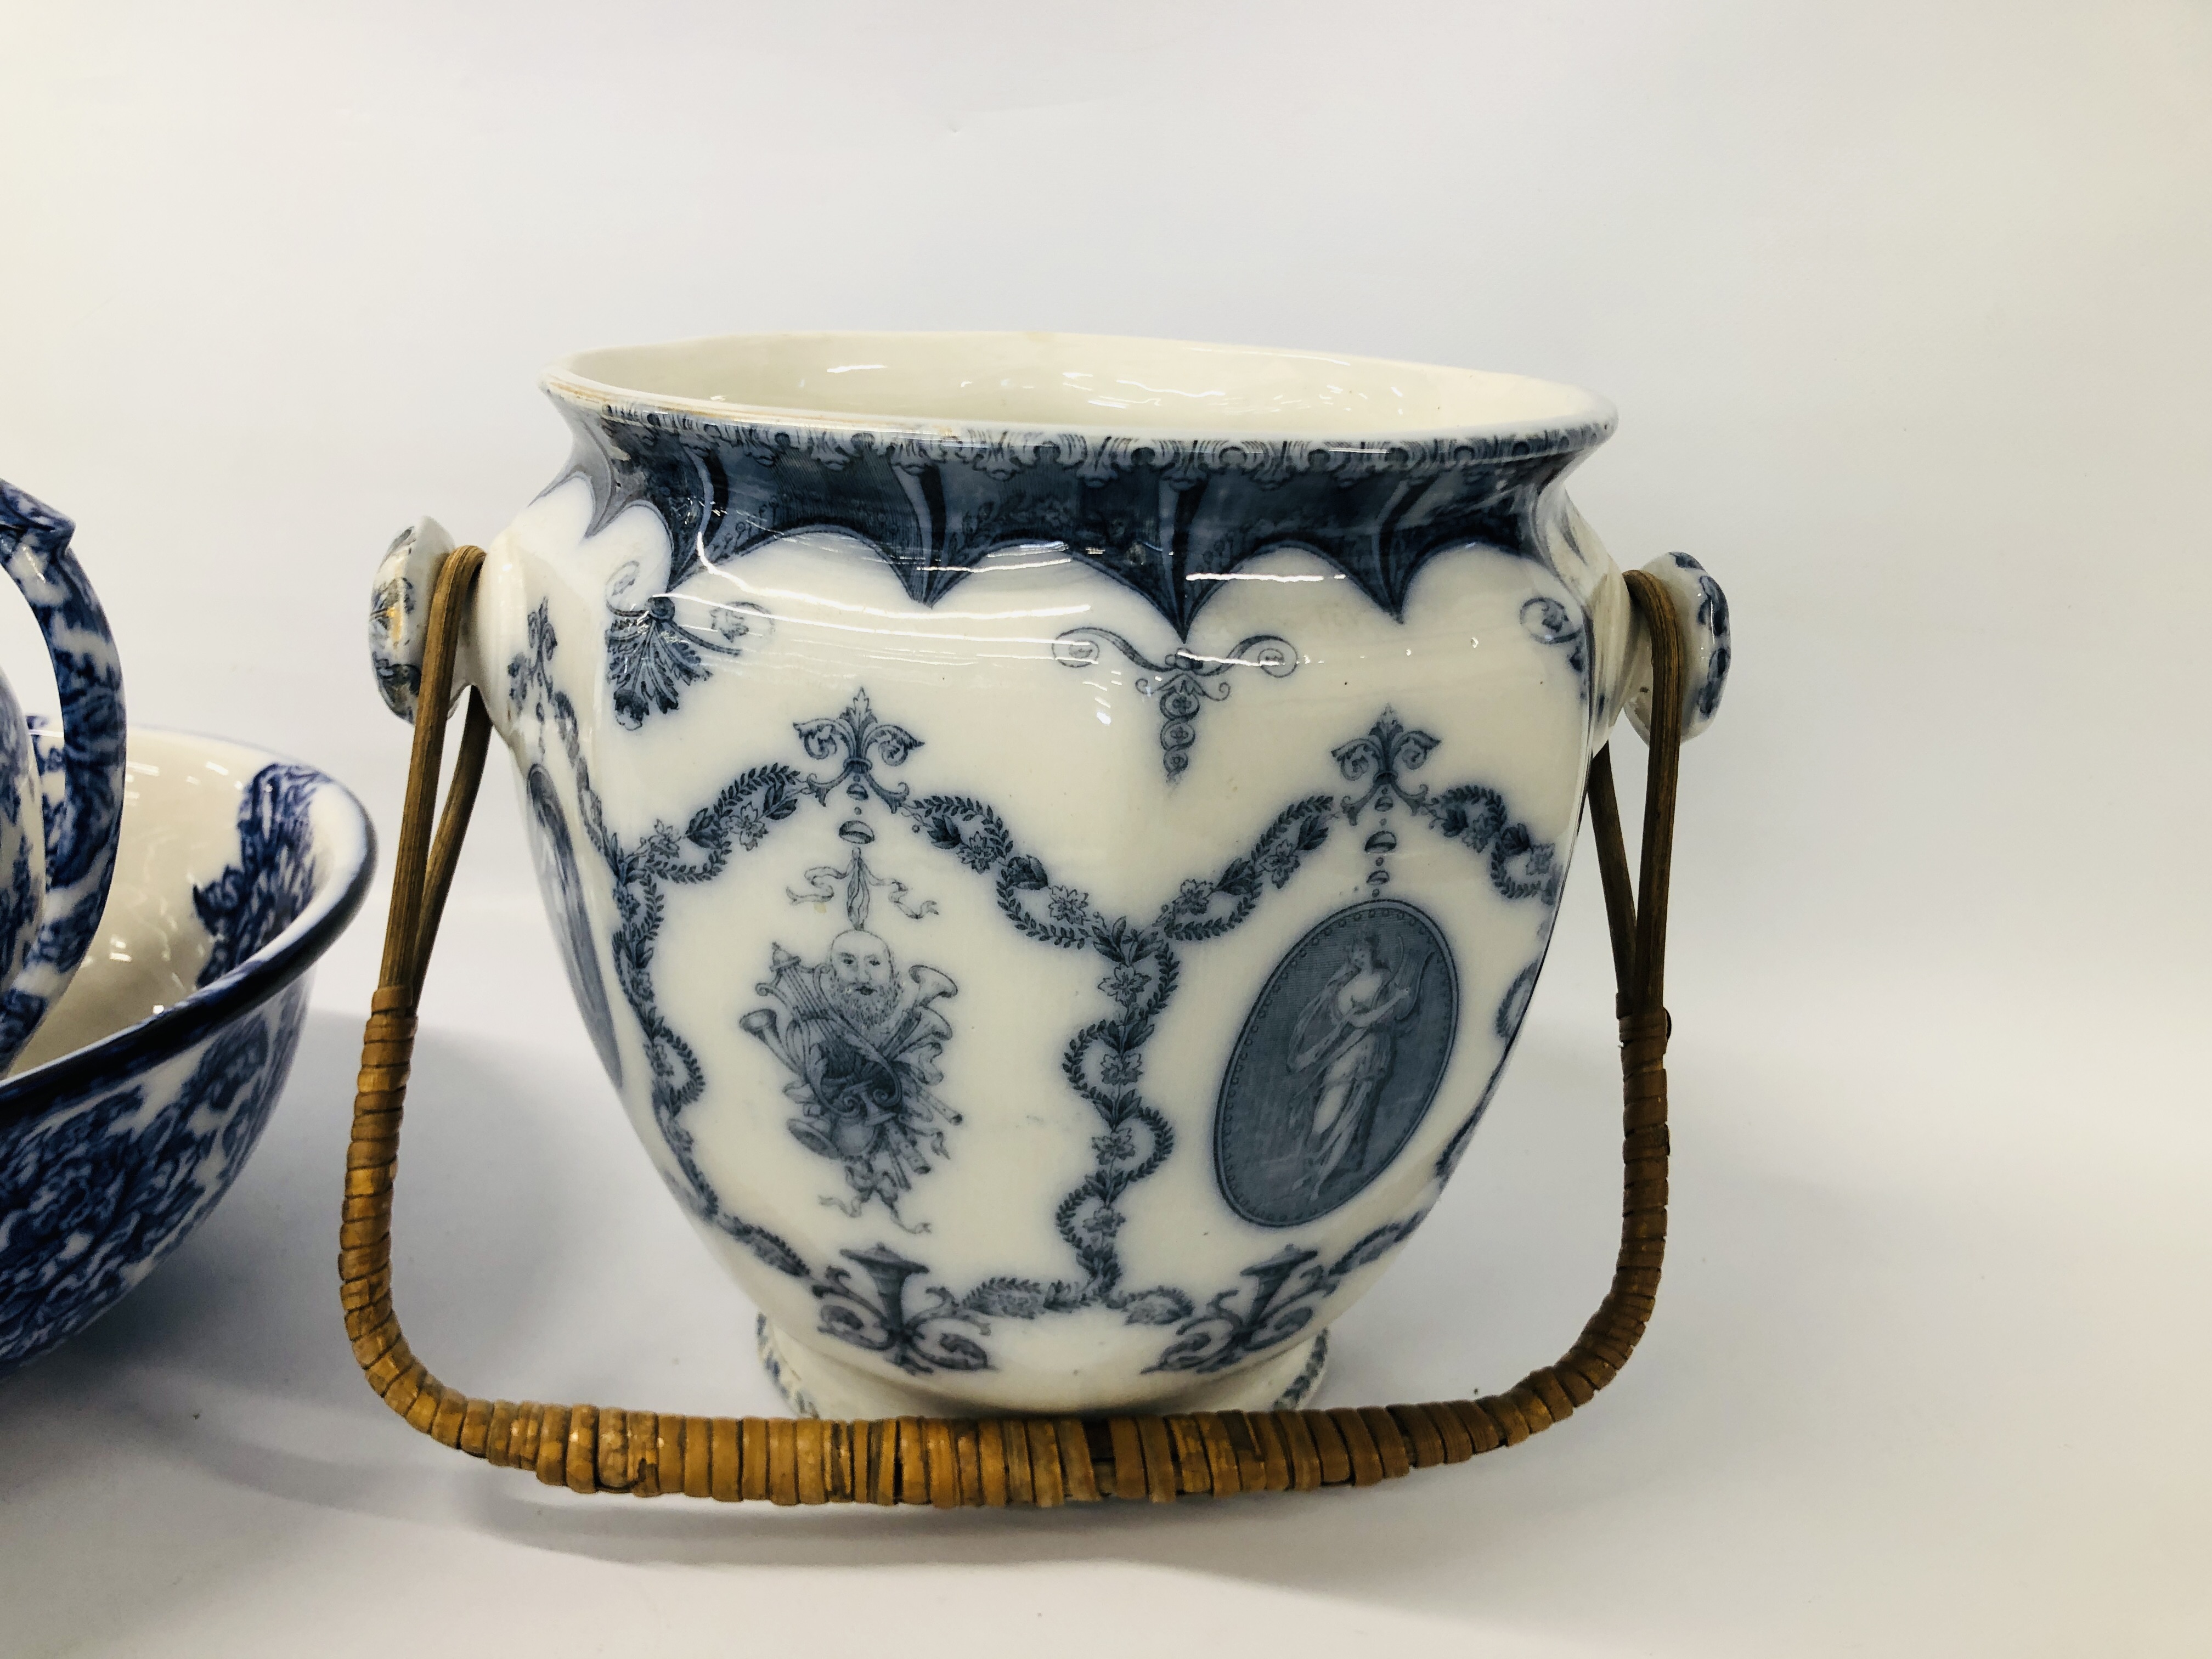 LOSOL WARE "CAVENDISH" BLUE AND WHITE ROSE DECORATED WASH JUG AND BOWL ALONG WITH A "BOOTHS" - Image 4 of 11